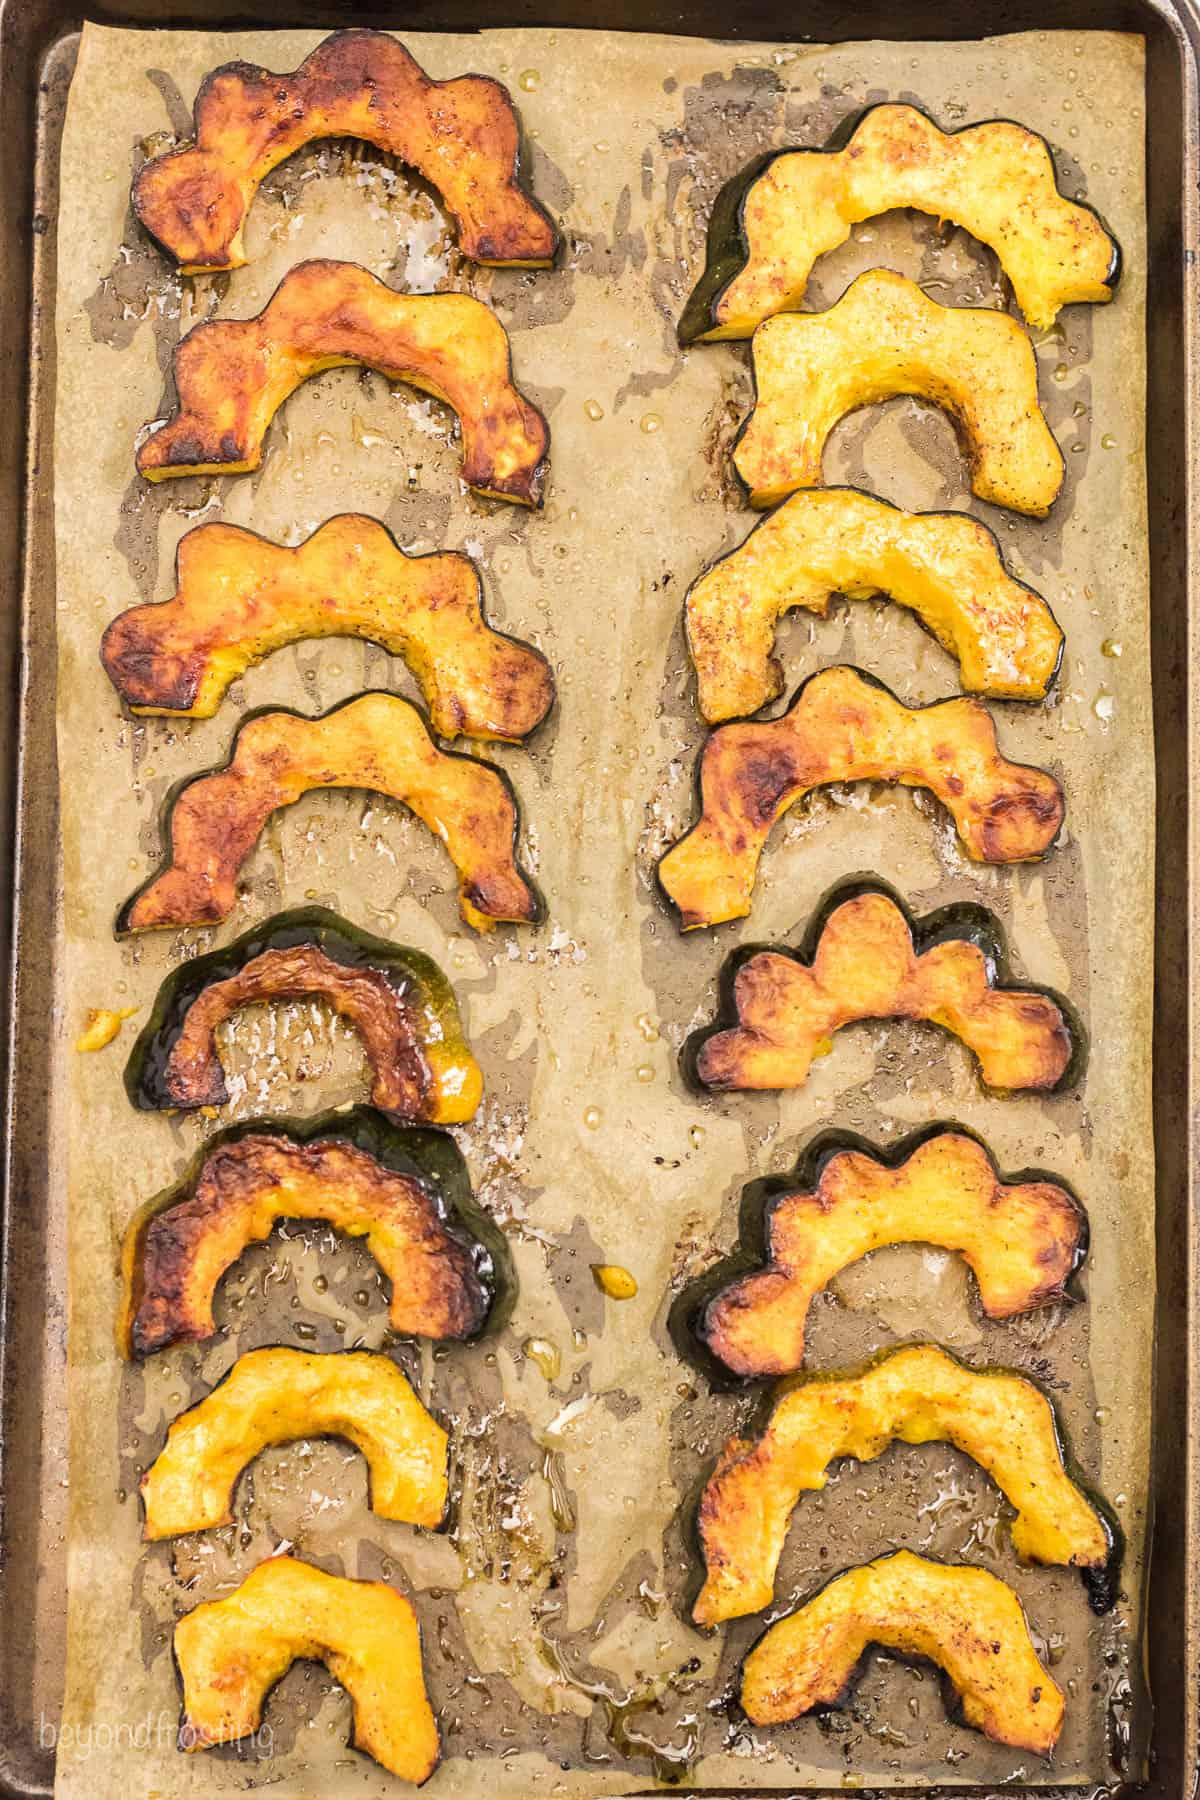 Freshly roasted acorn squash slices on a metal baking sheet lined with parchment paper